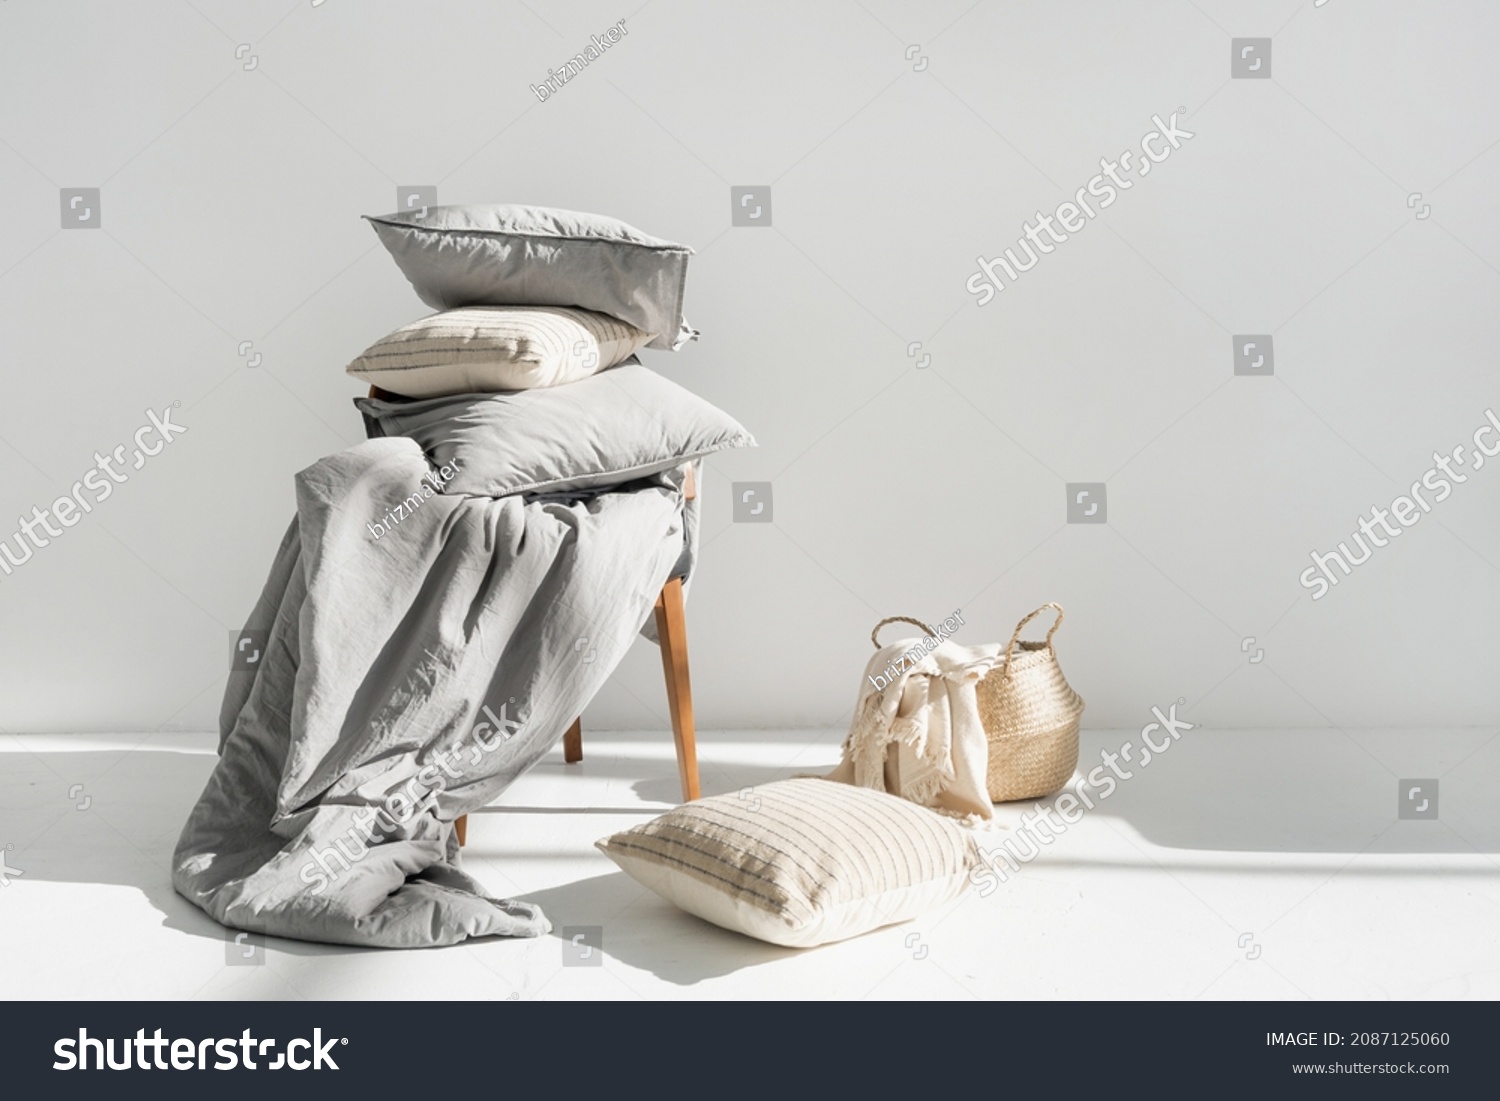 Plaid in wicker basket, clean blanket, linen bedding, cotton sheets, pillow, cushion and duvet with natural material on chair after laundry, copy space. Washing, housekeeping, hotel service concept #2087125060